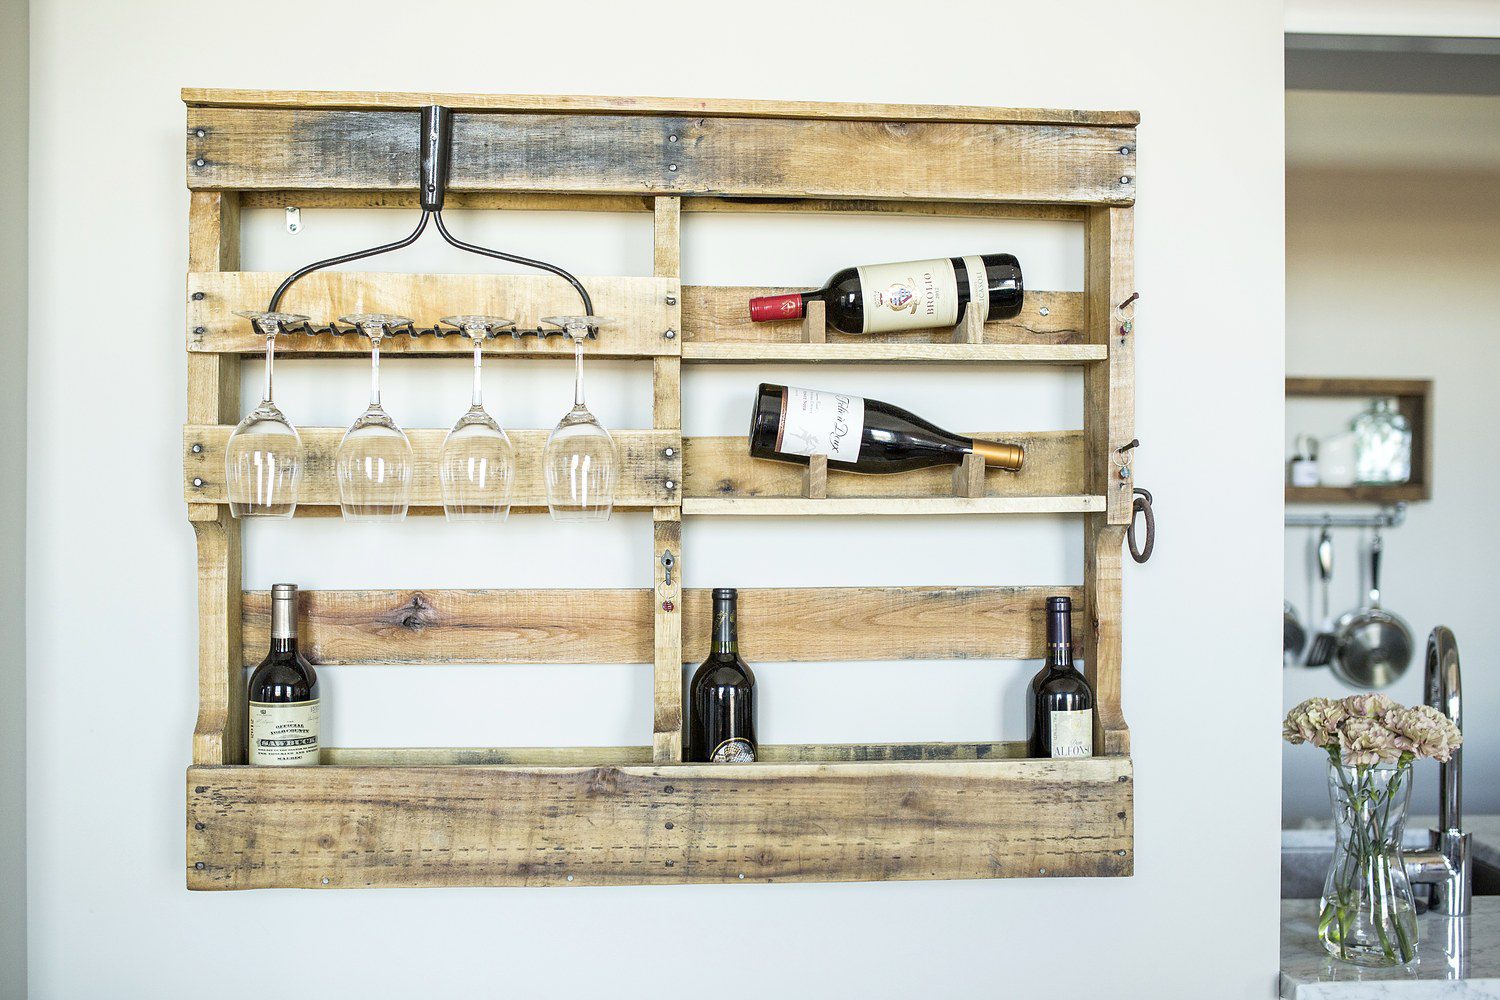 A wooden pallet with wine glasses and bottles on it.